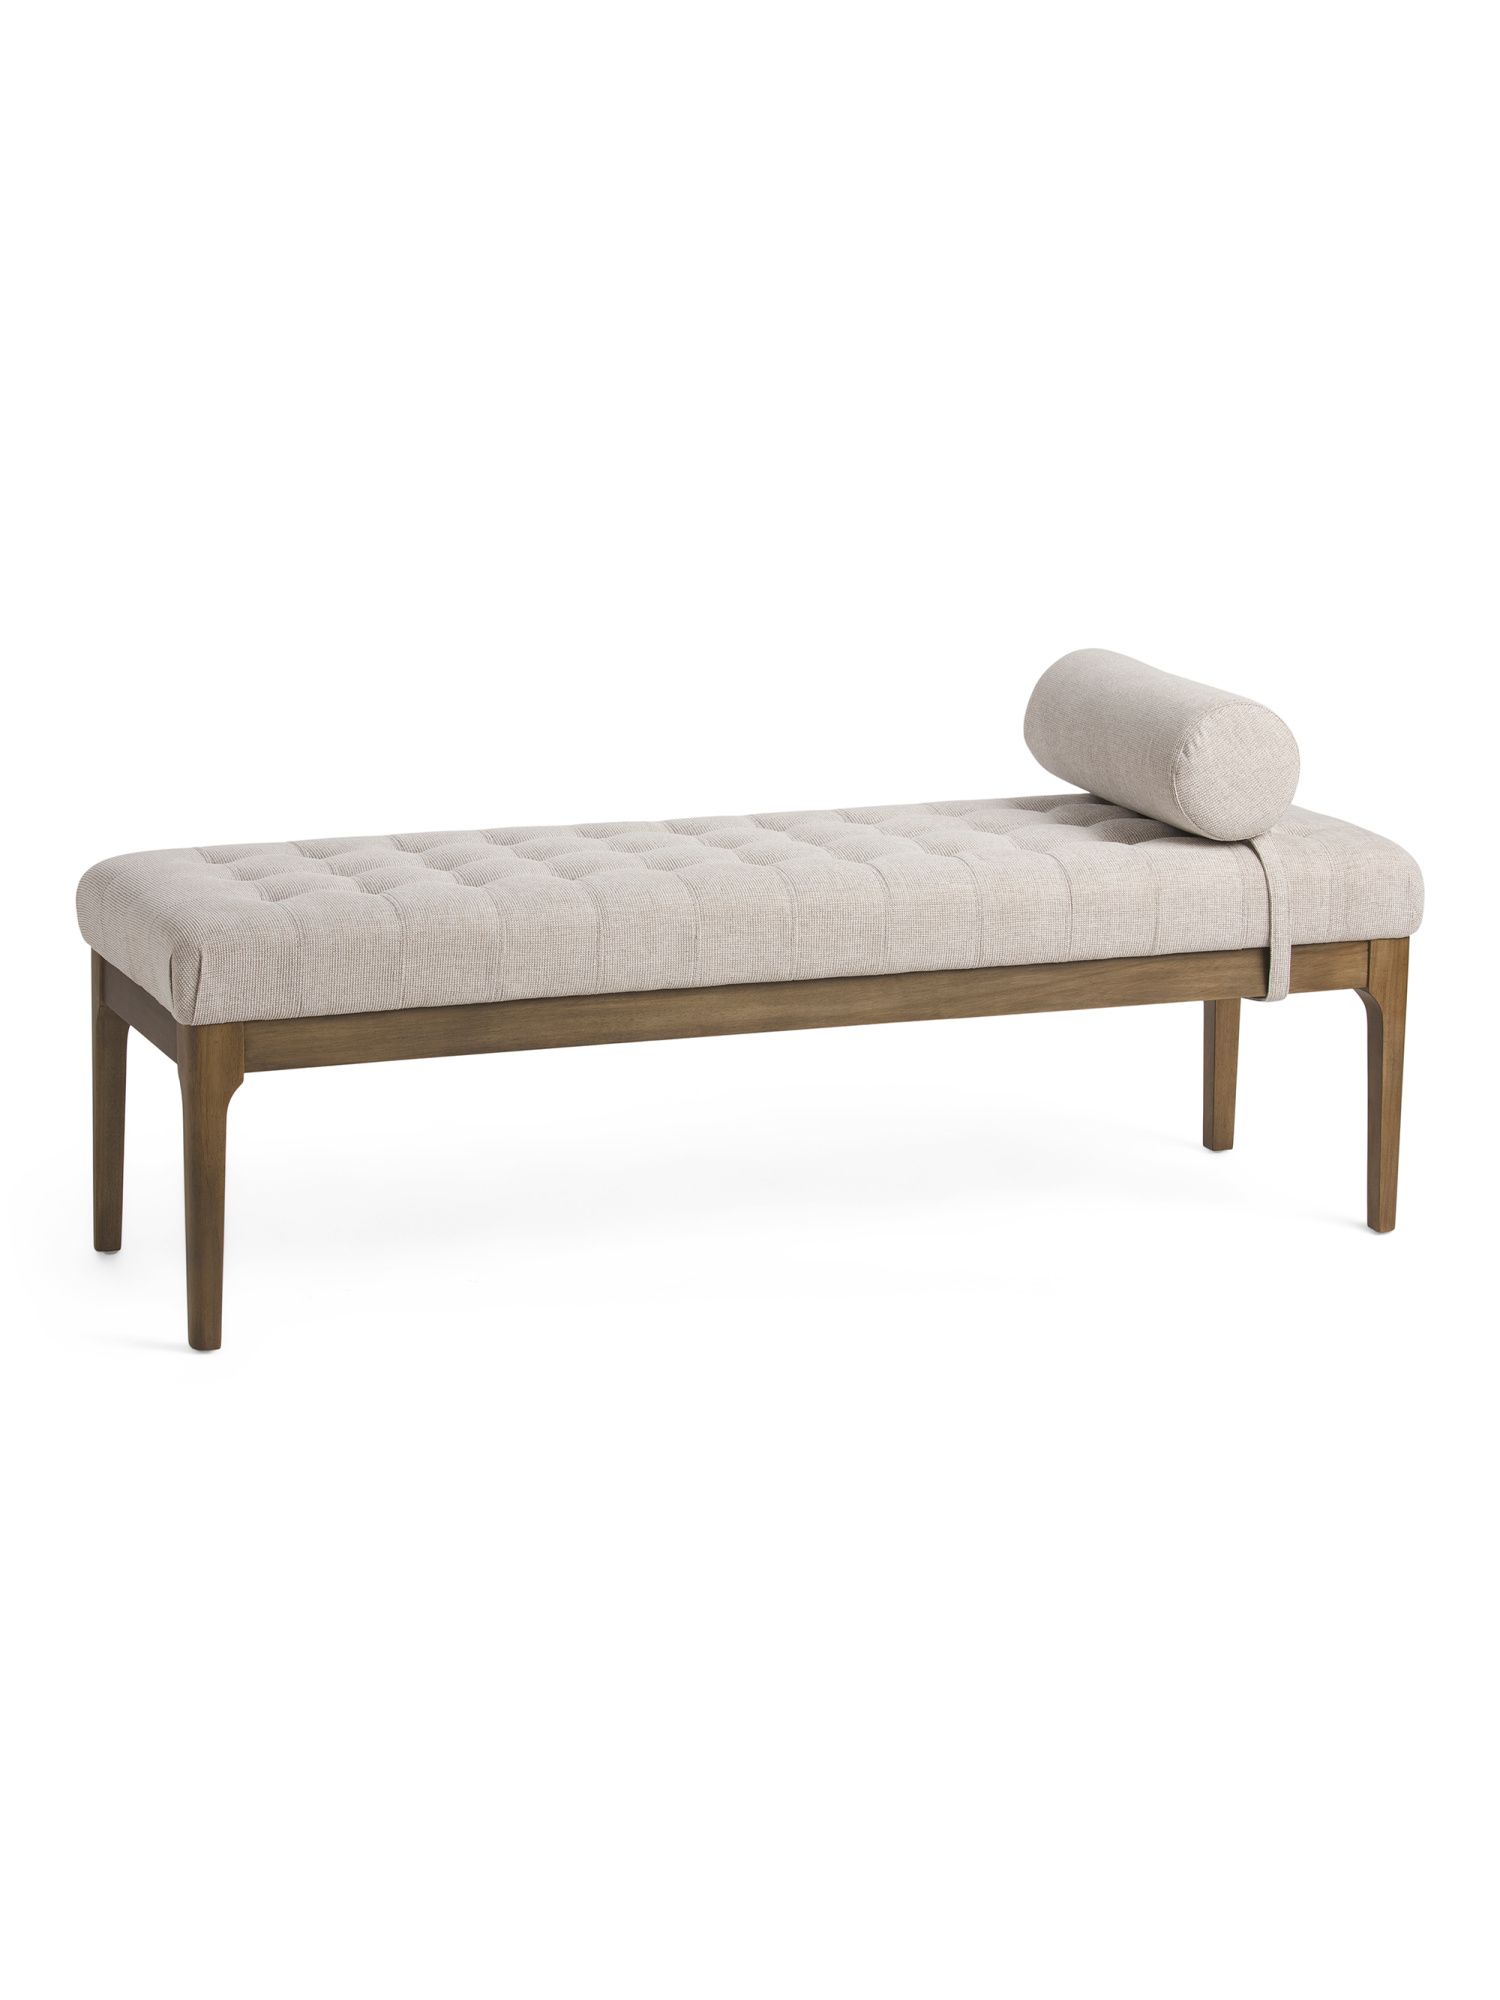 Wood Framed Bench With Pillow | TJ Maxx